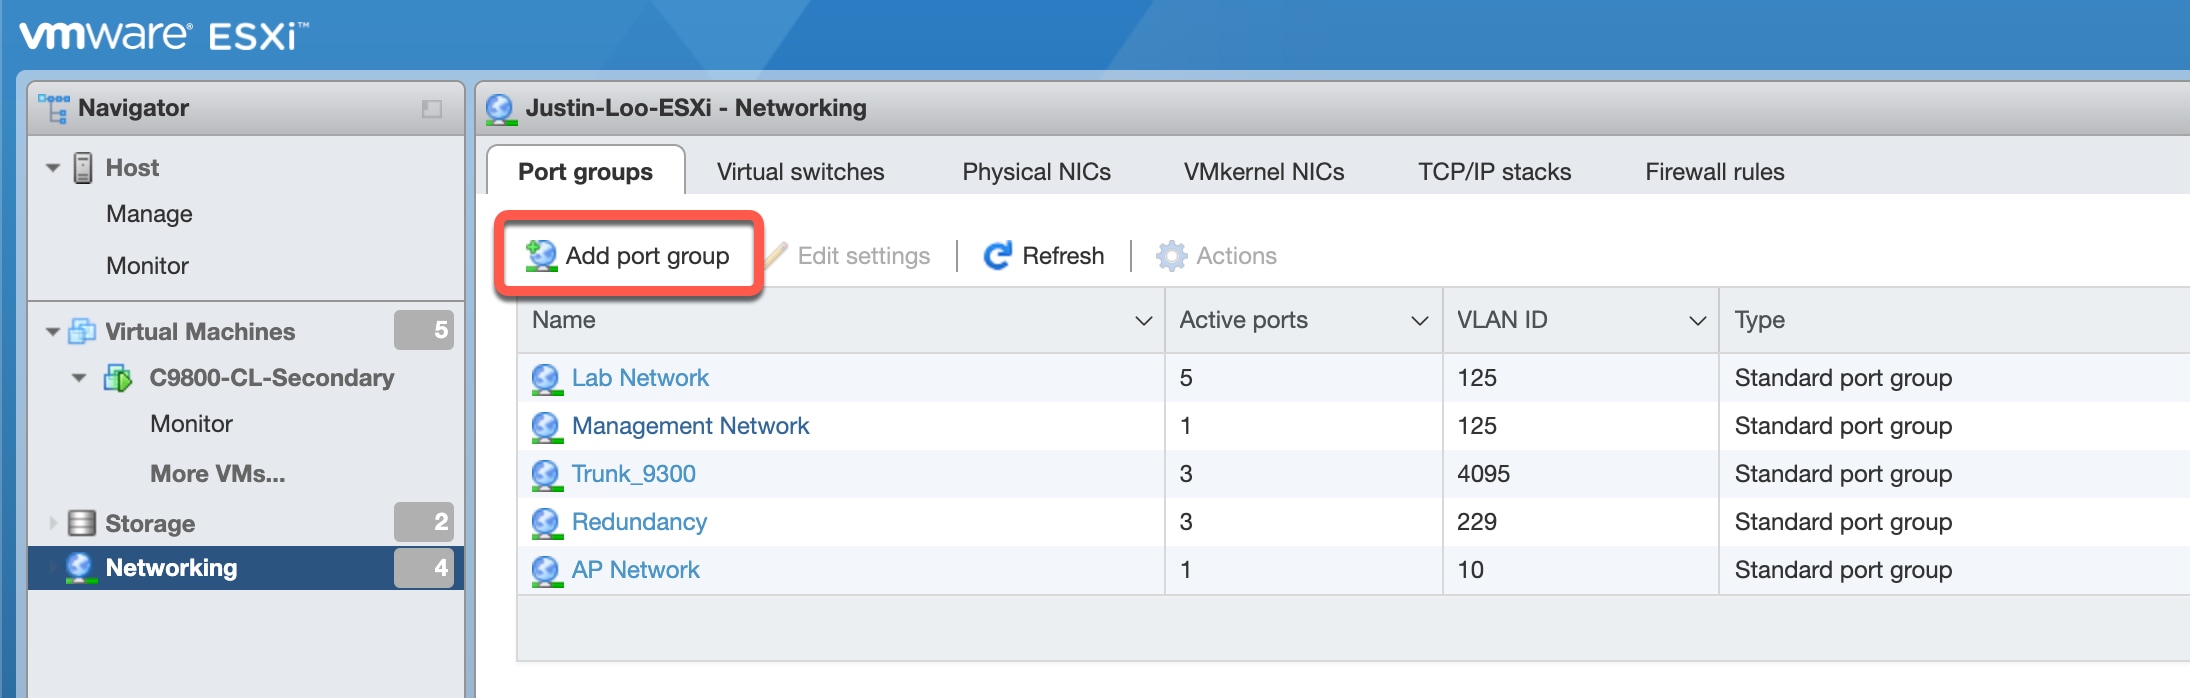 Networking > Port groups and click Add port group